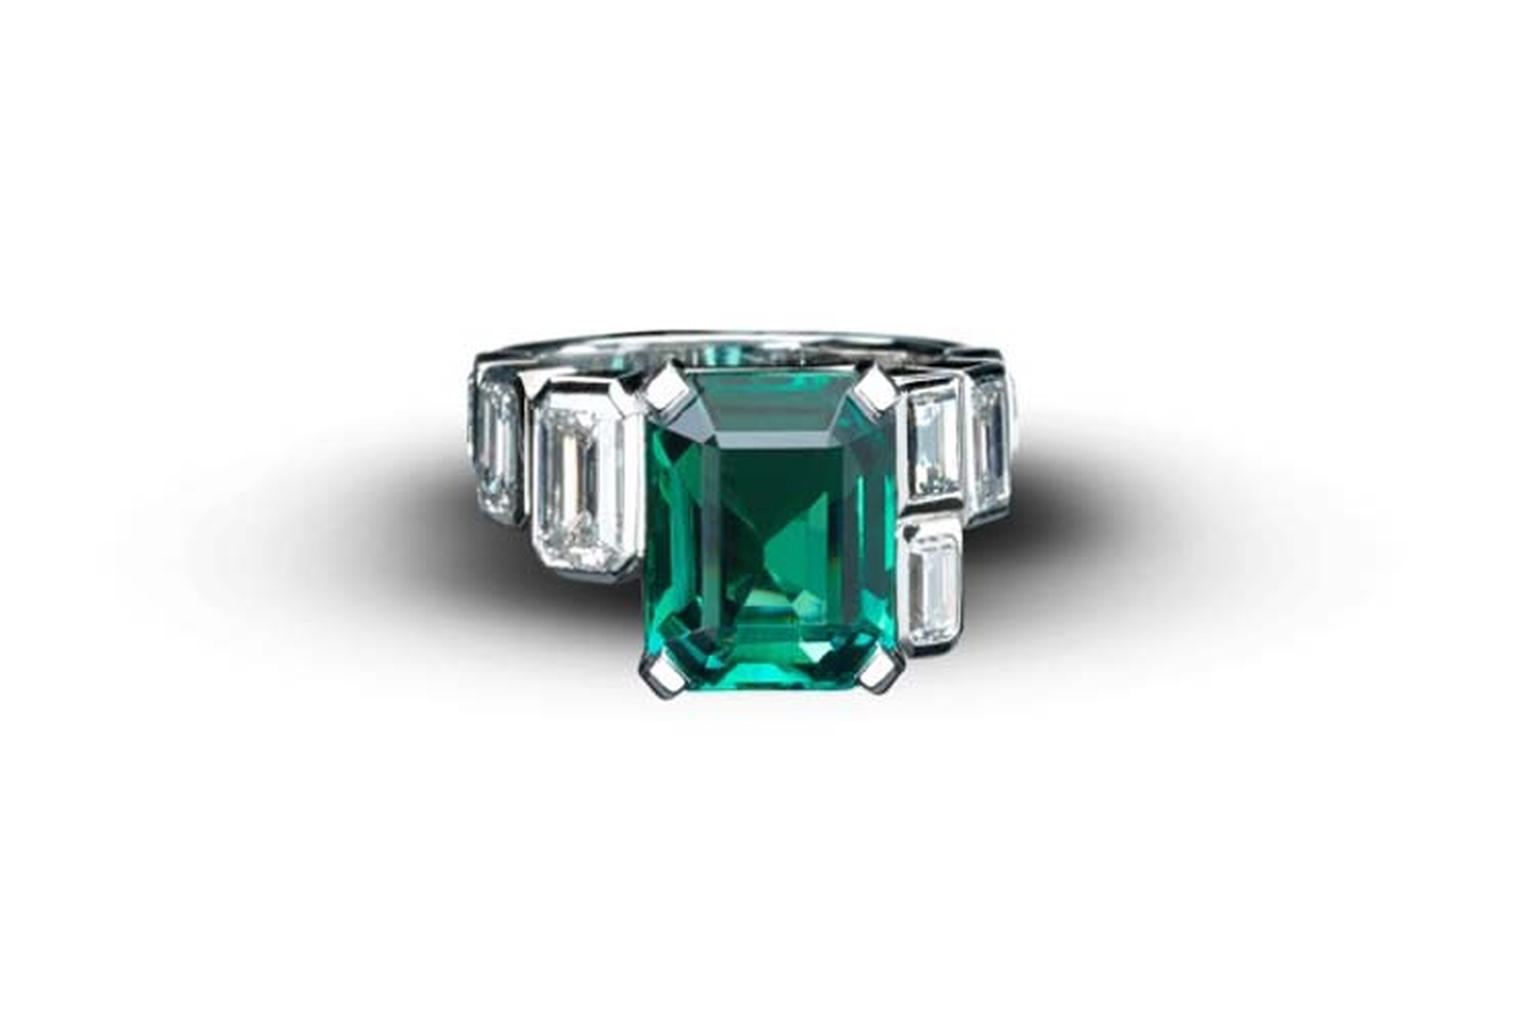 Emerald Art Deco Style ring from Star Diamond, with a central African emerald, weighing 5.9cts, flanked with white emerald cut diamonds of 2.73cts set in white gold.